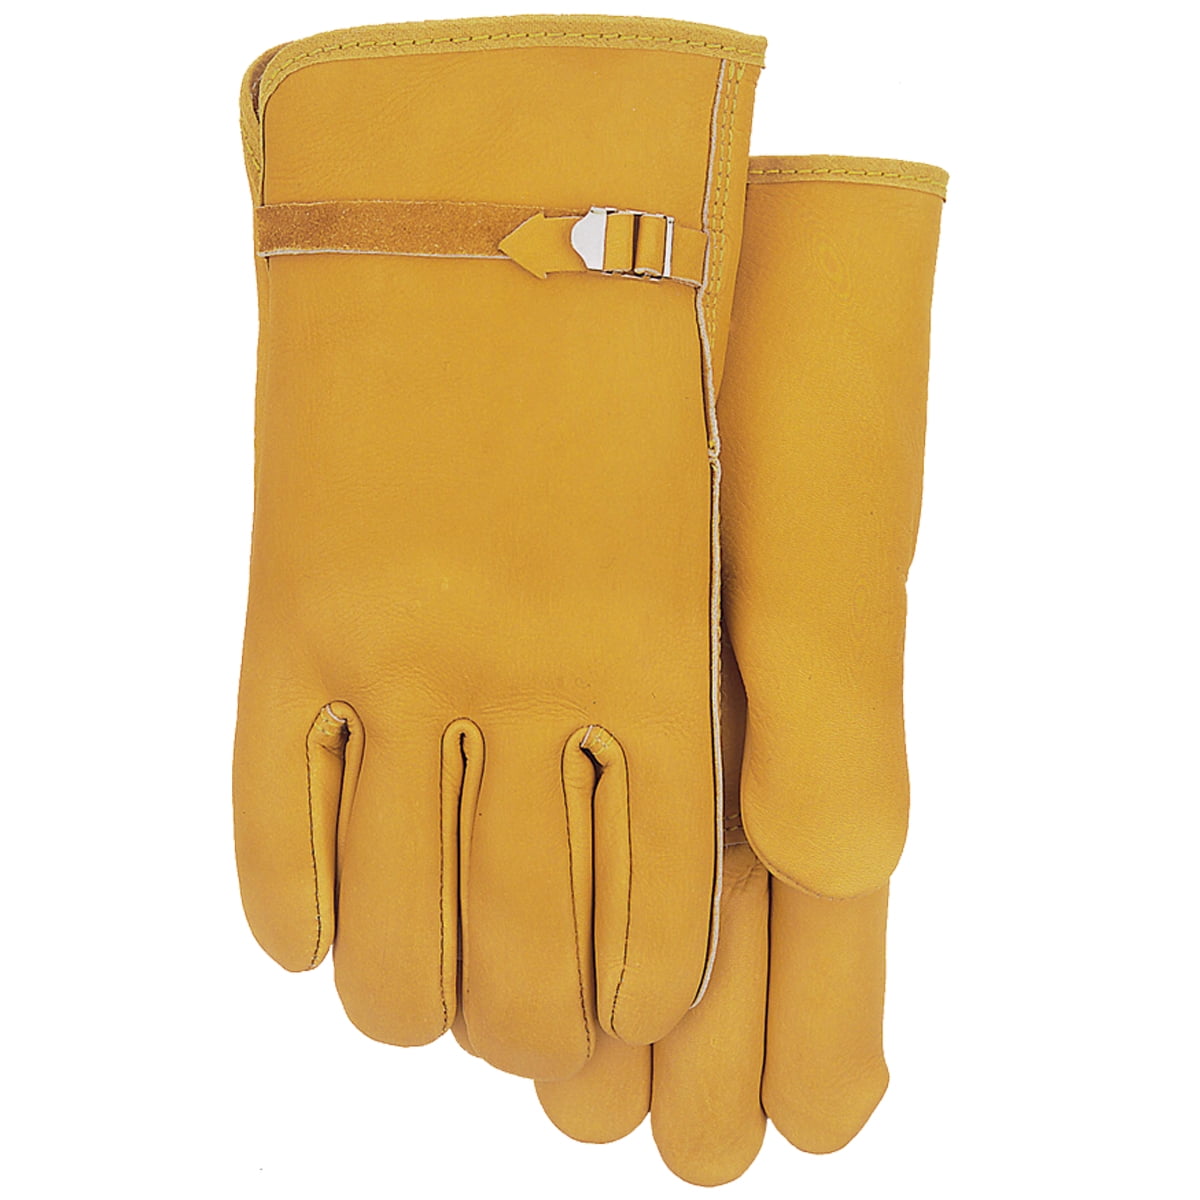 Midwest Quality Pigskin Leather Gloves Large 